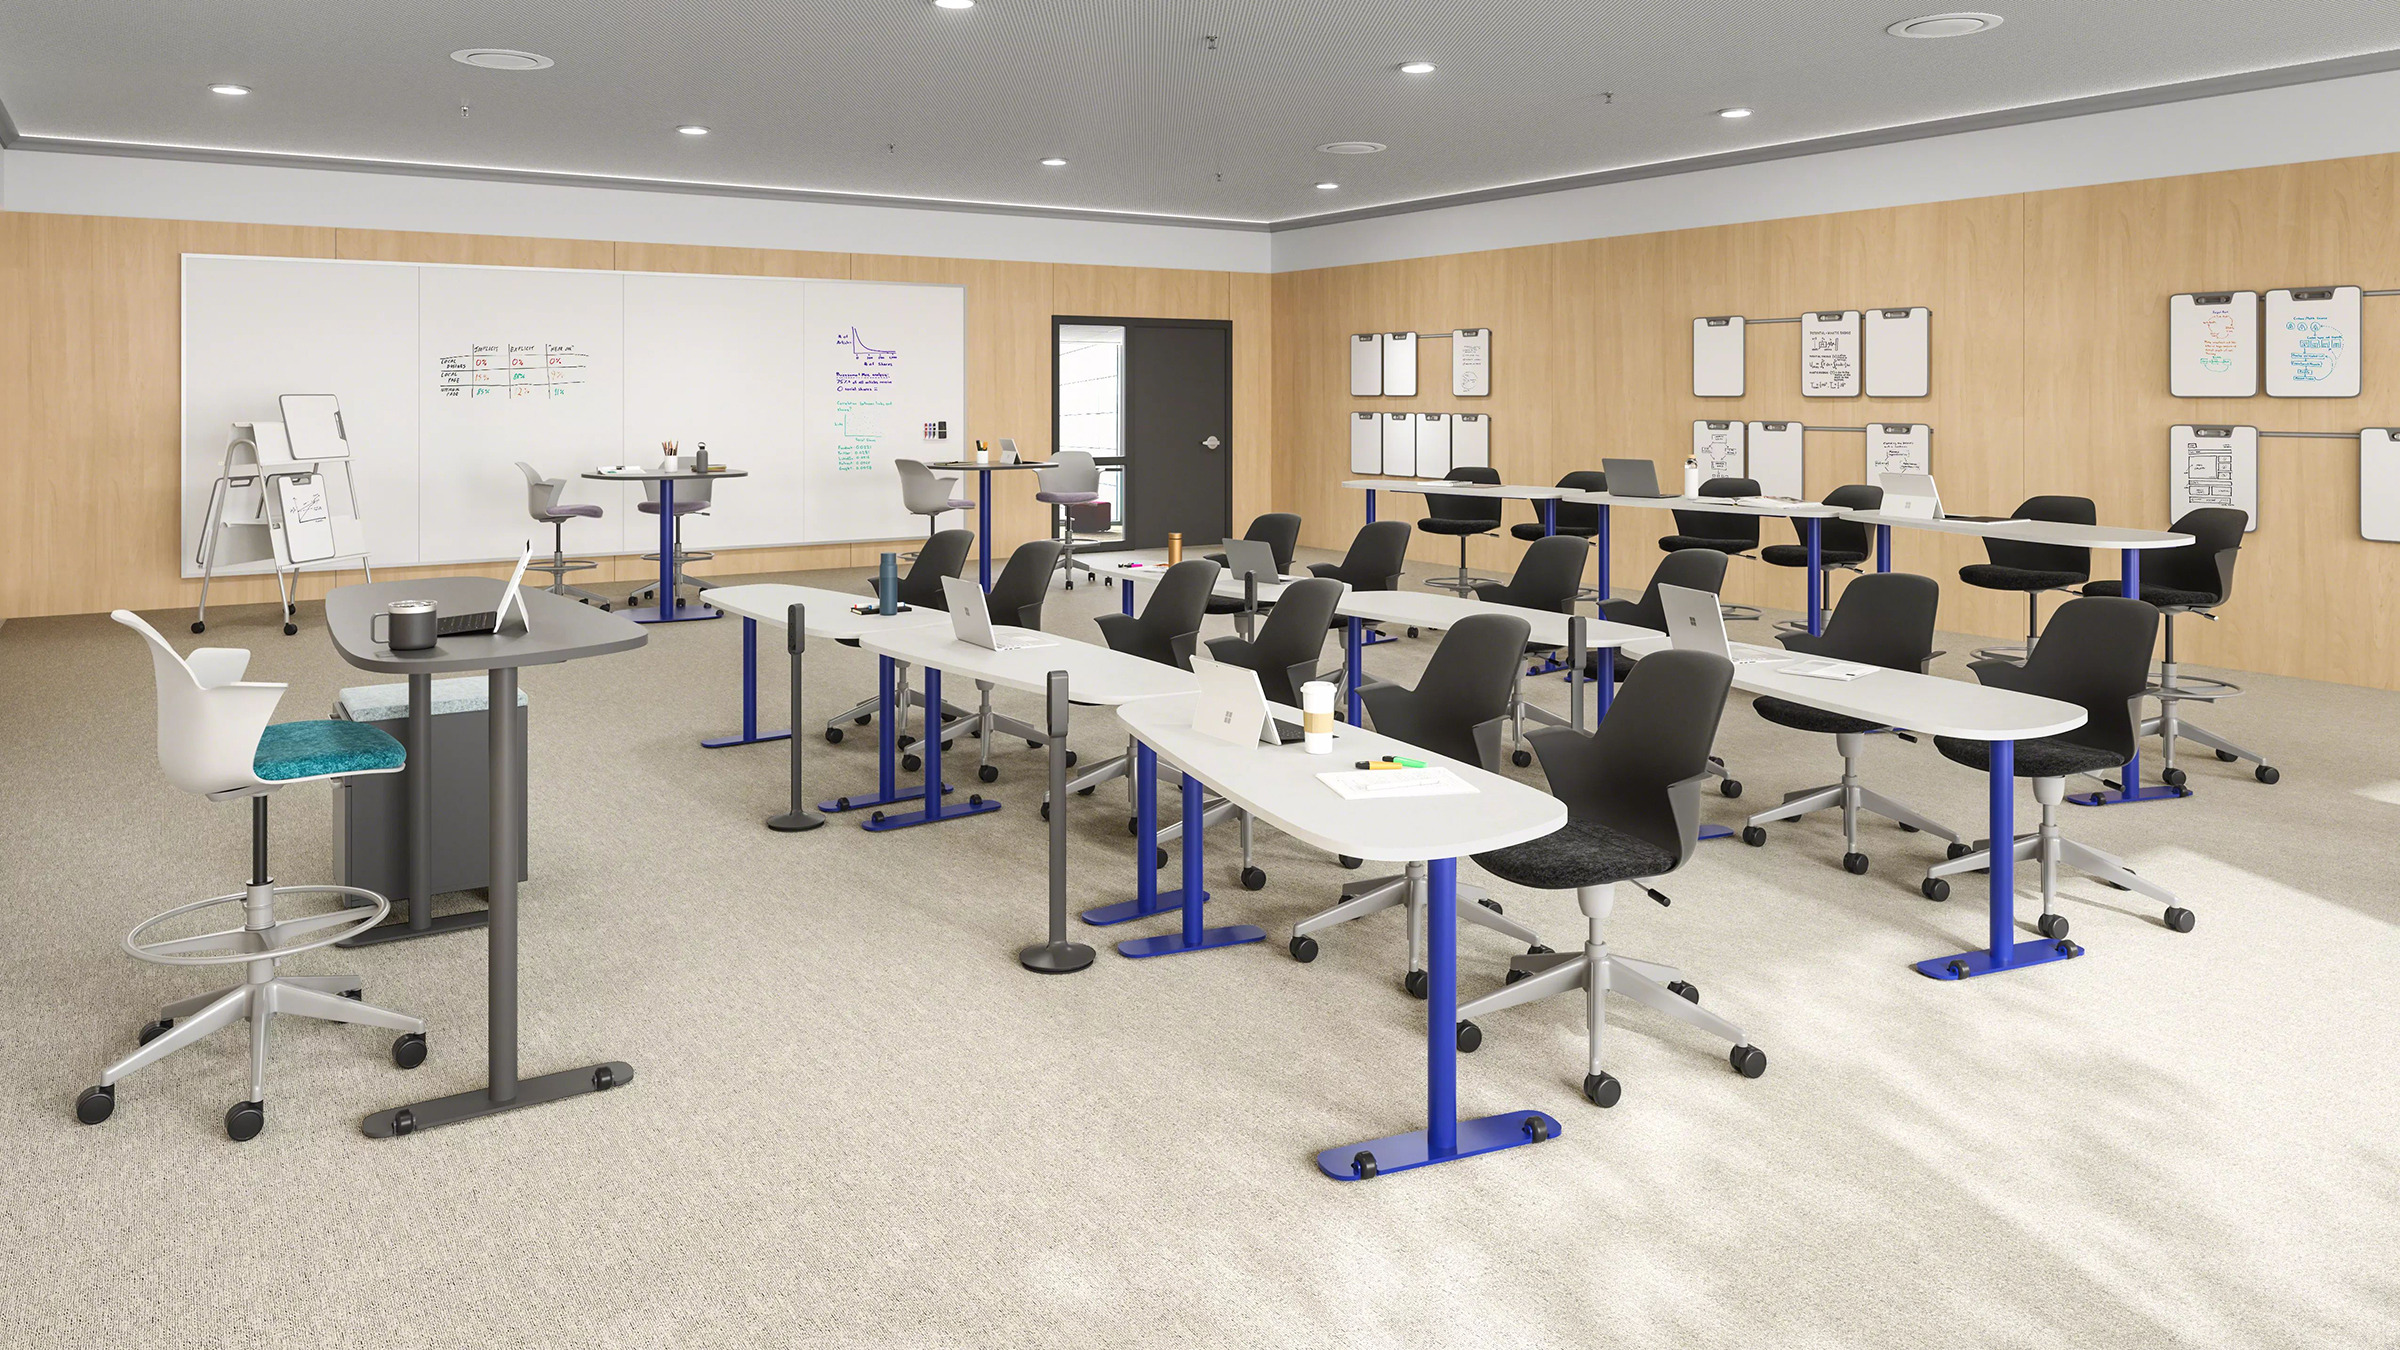 Educational spaces that support the learning process